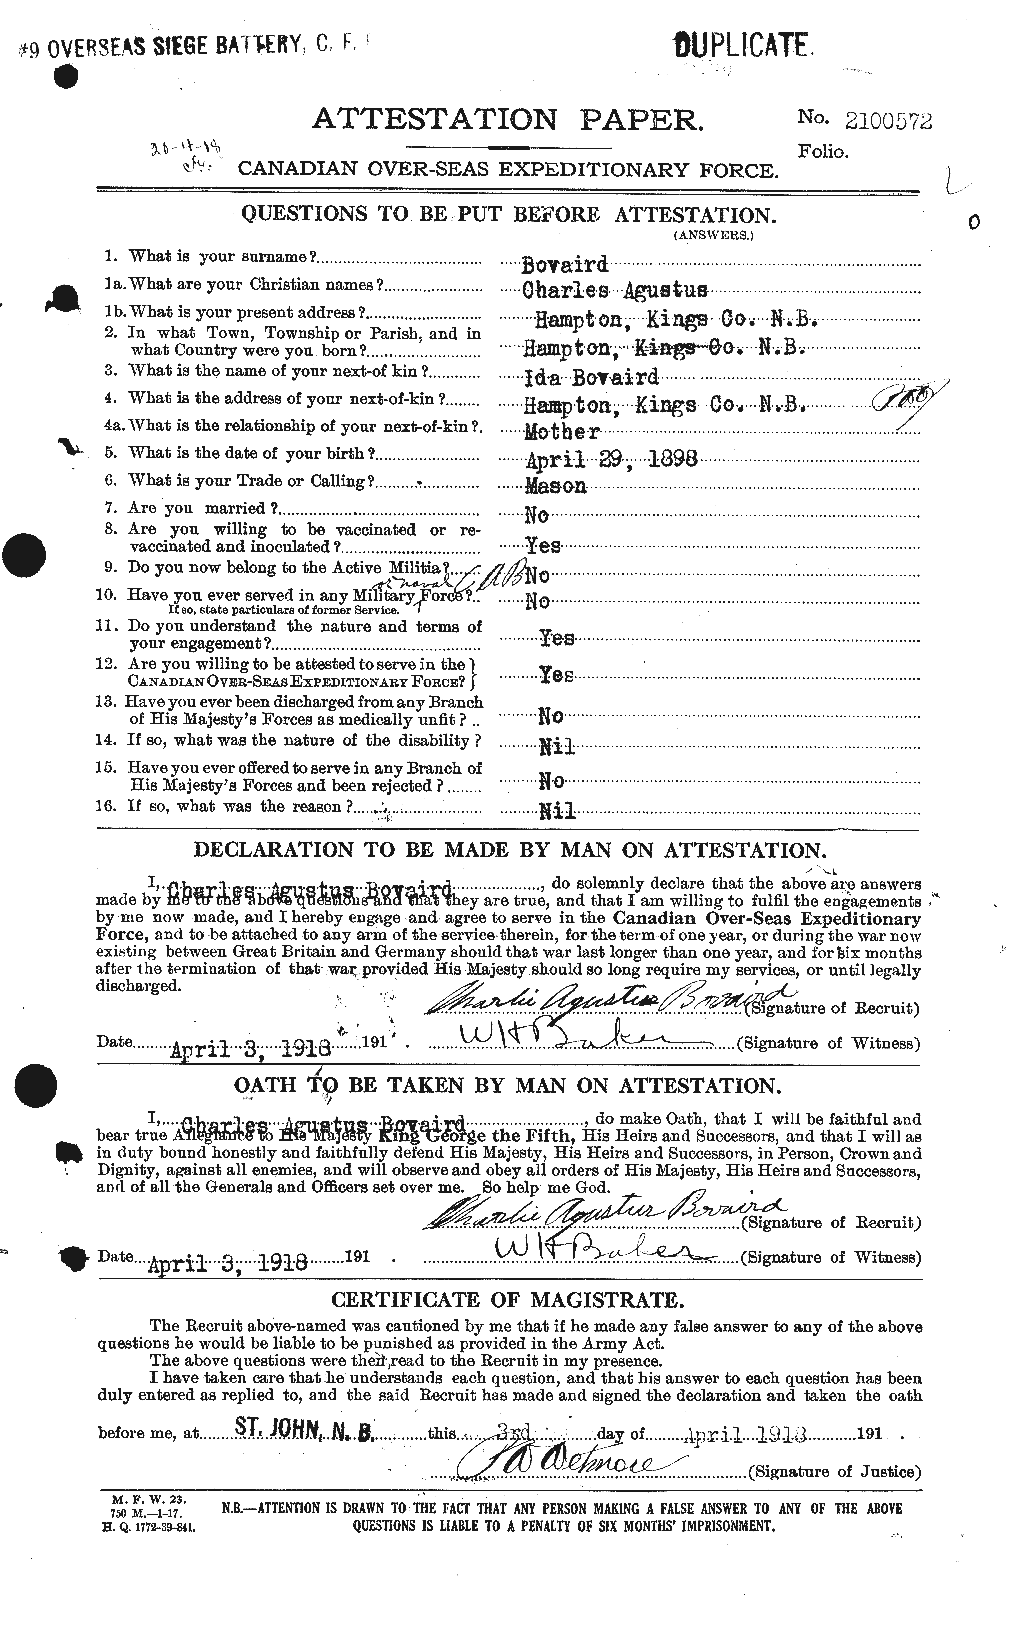 Personnel Records of the First World War - CEF 254395a